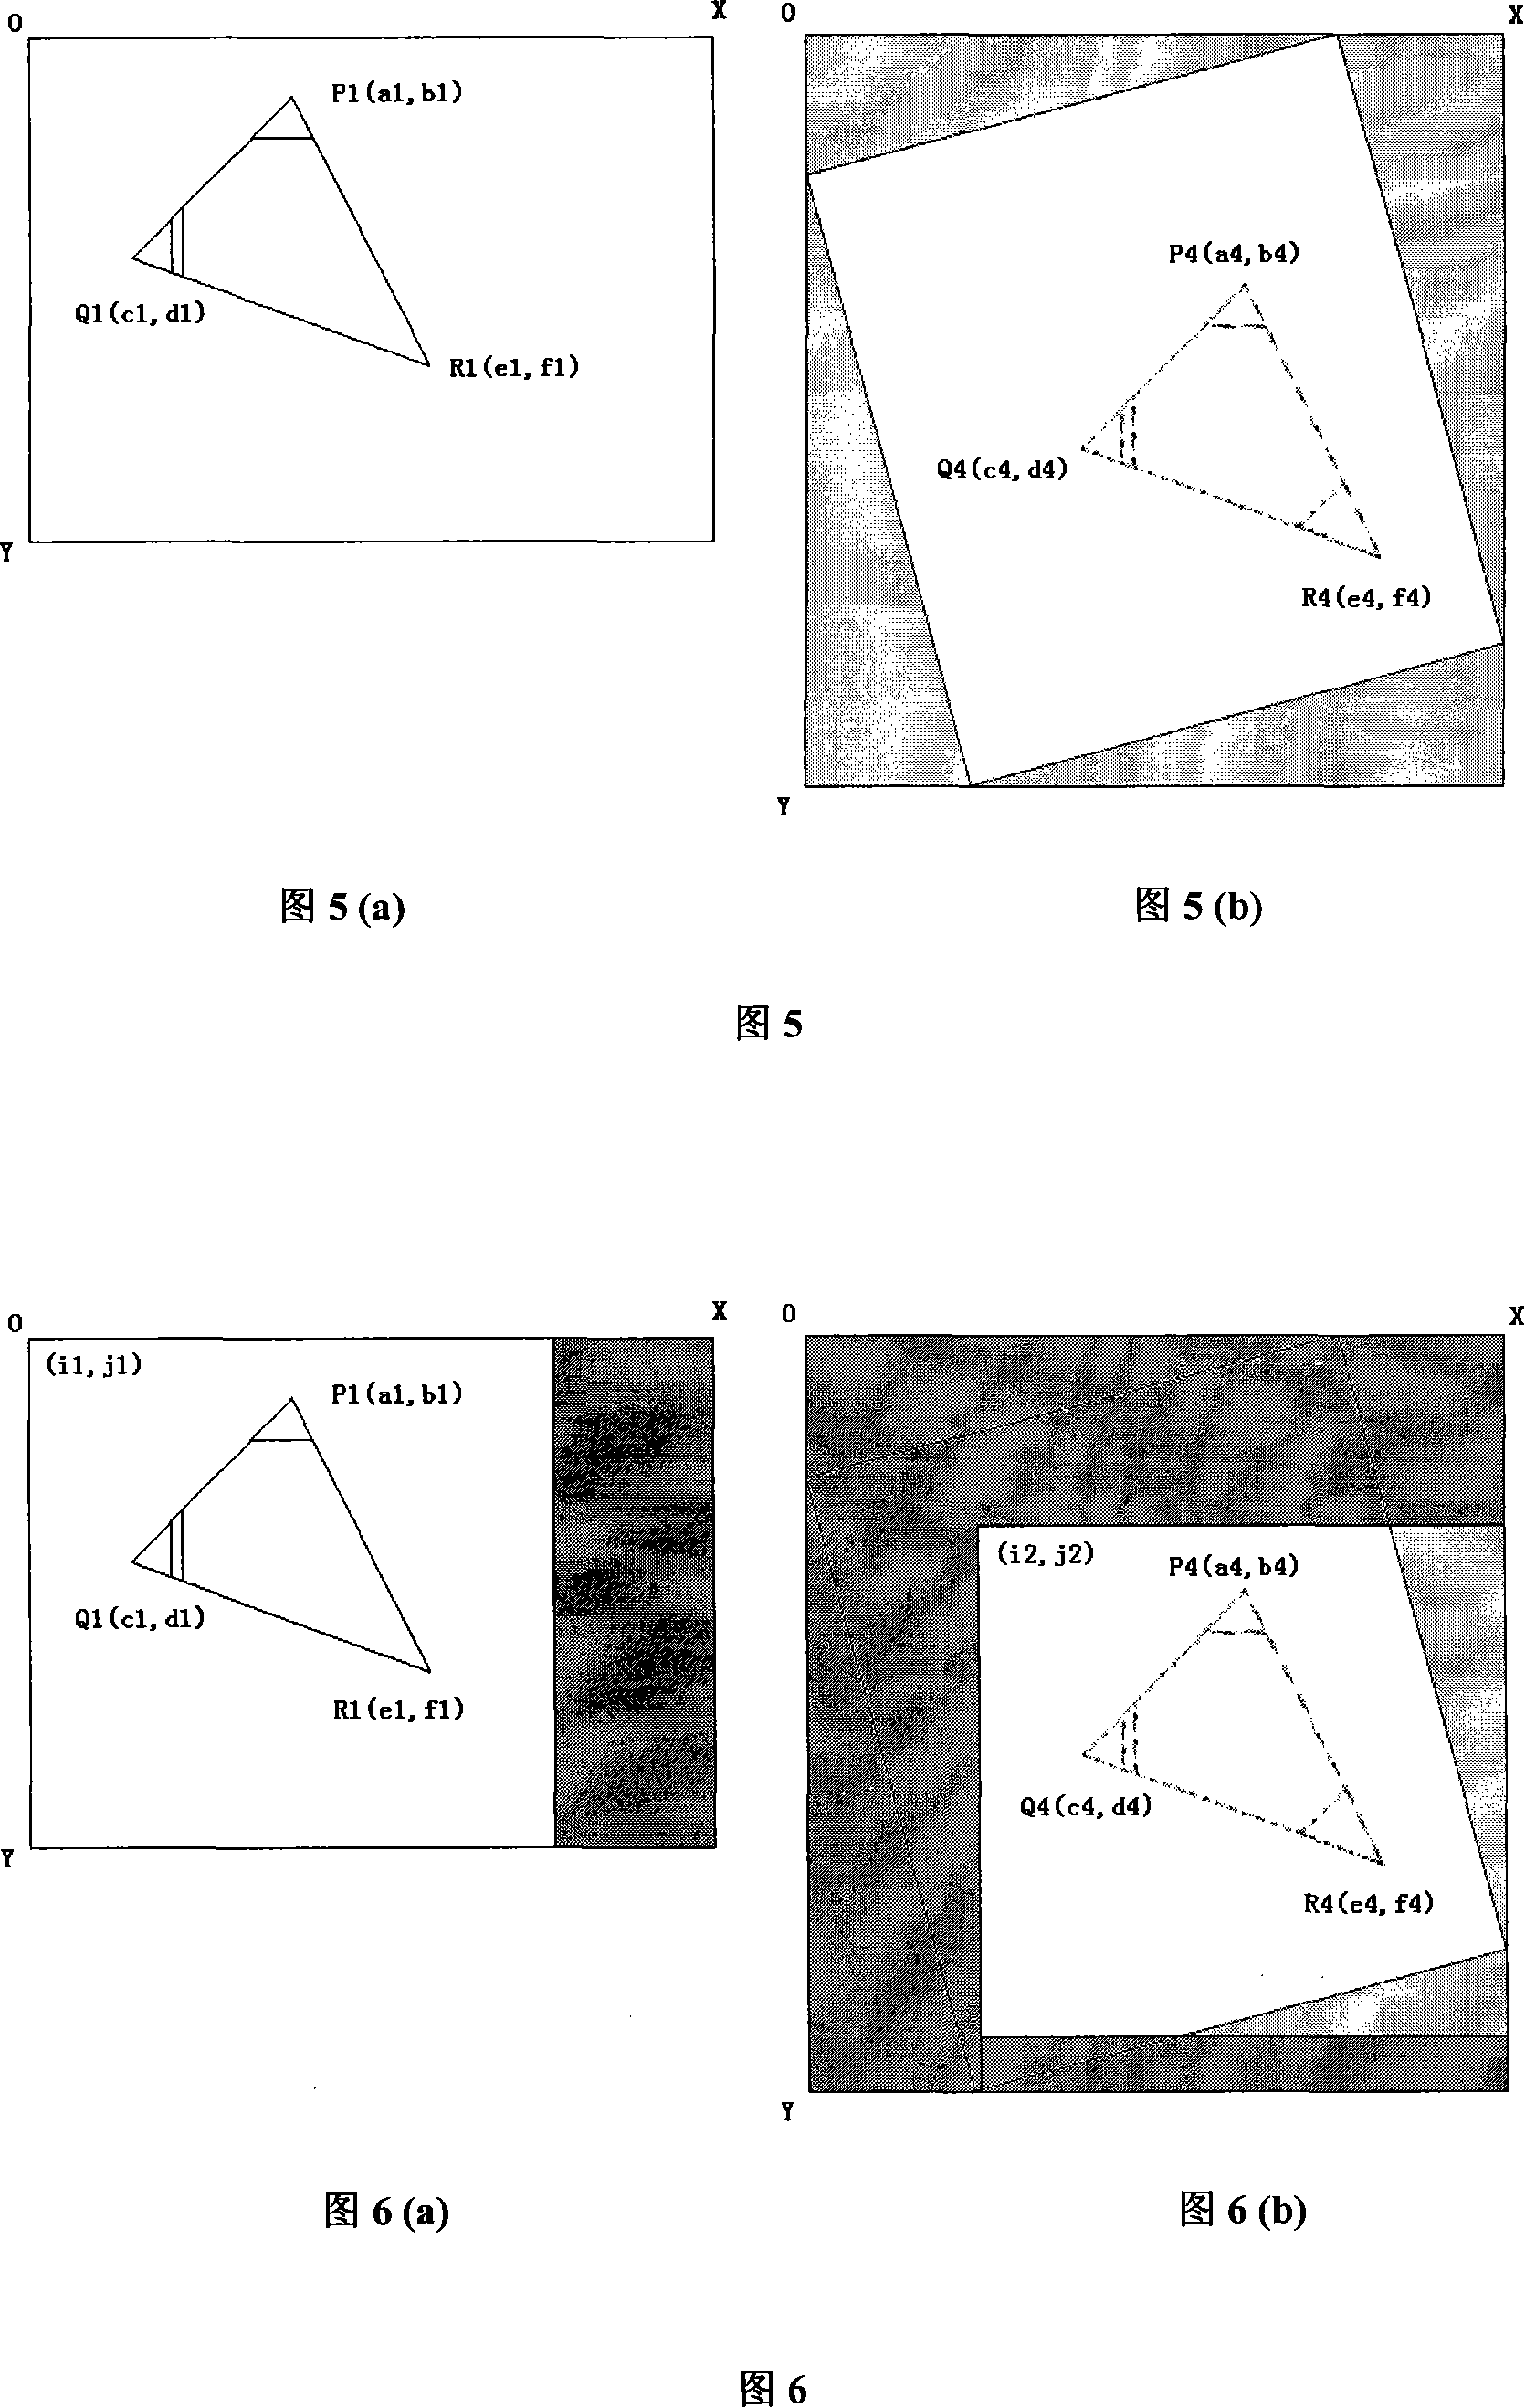 A pre-processing method for obtaining differential image